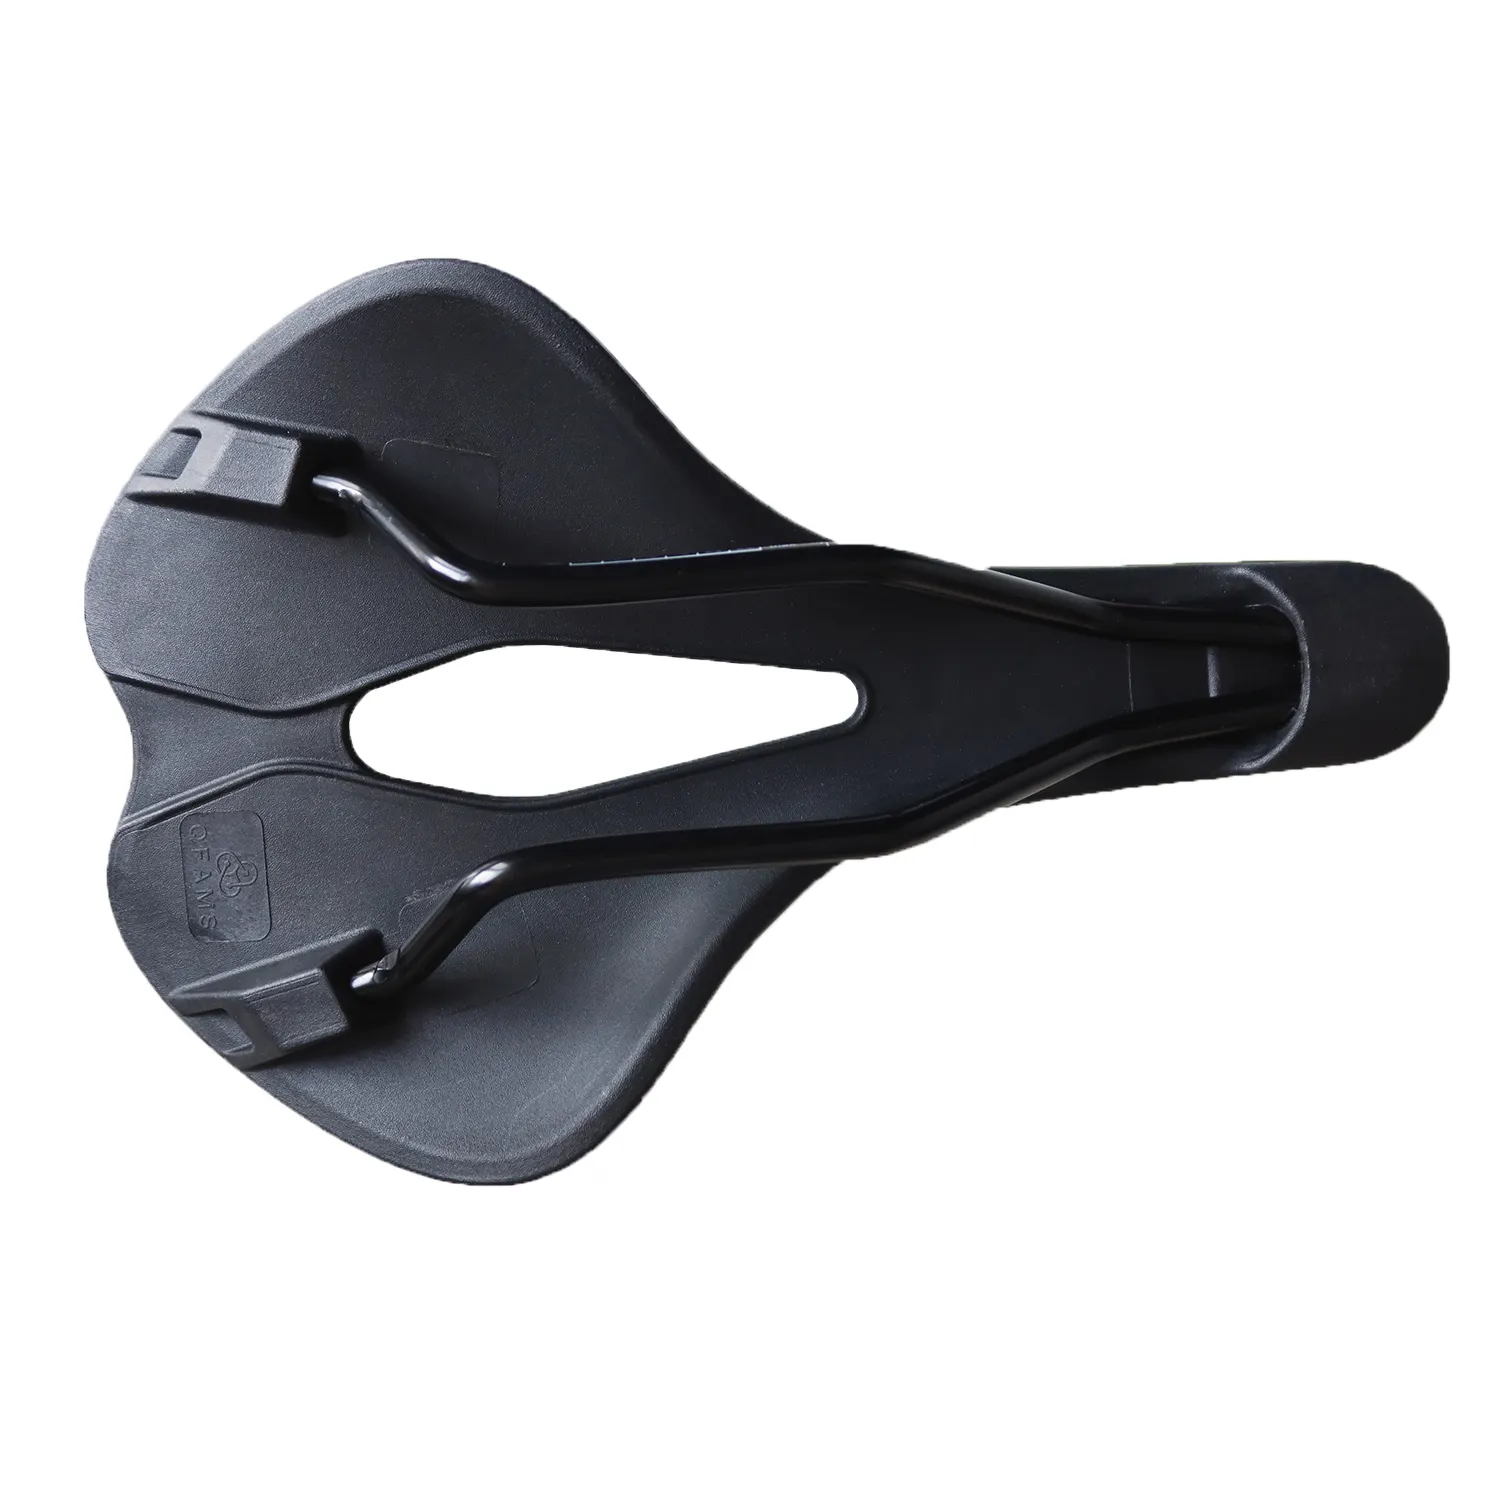 Comfortable Breathable Oversized Width 155mm 3D Printed Carbon Fiber Comfort Bicycle Seat Bike Saddle for Summer